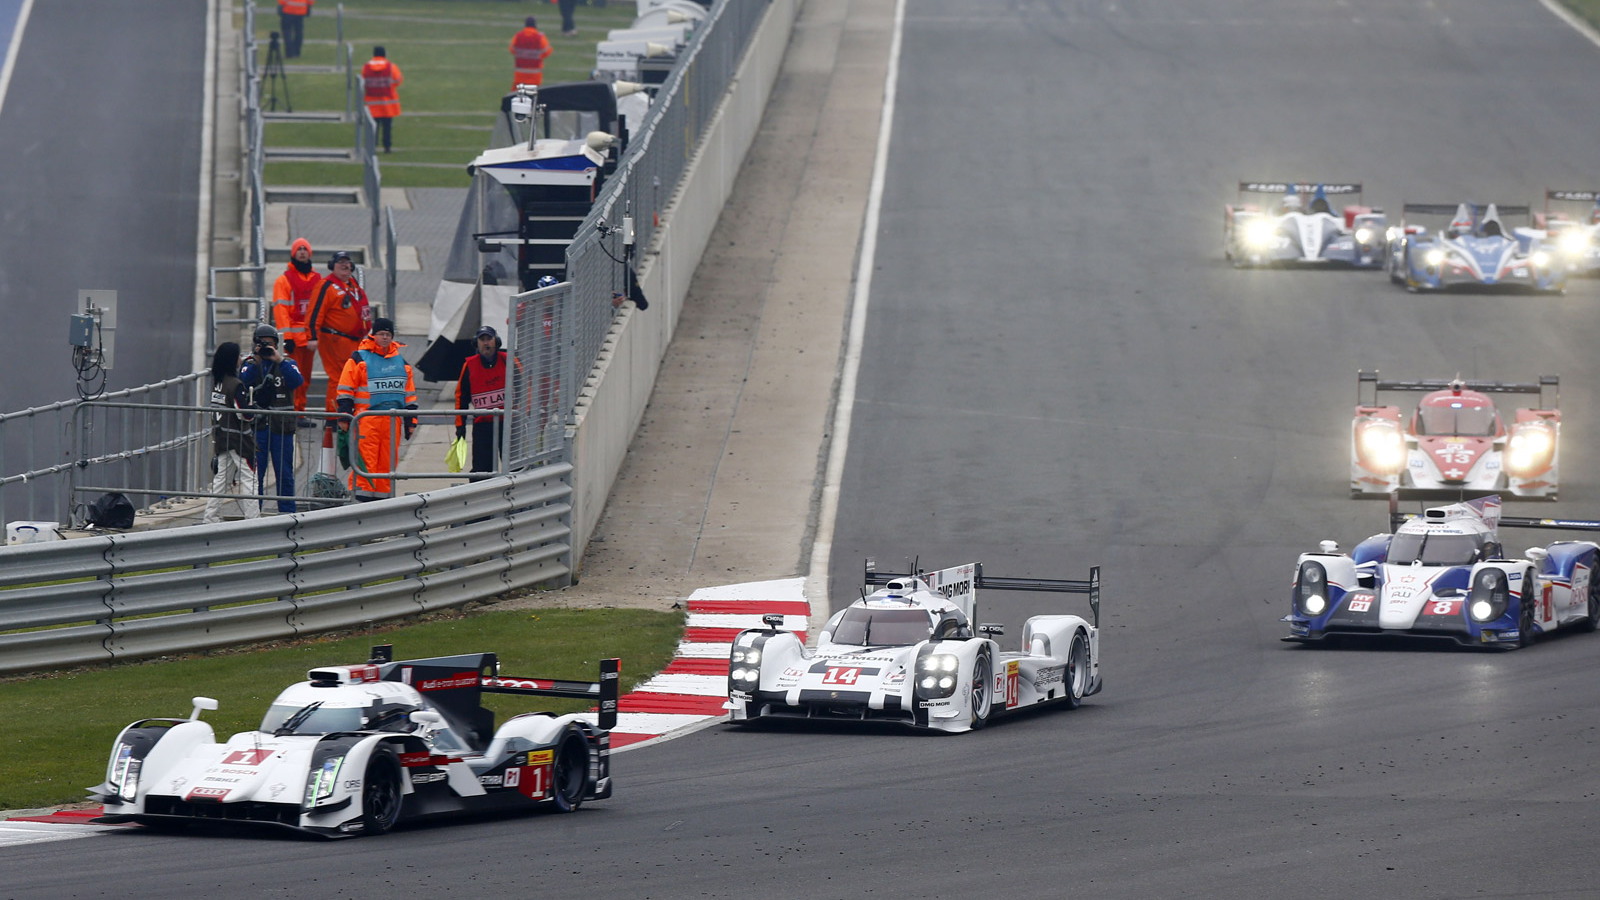 LMP1 cars in the 2014 6 Hours of Silverstone